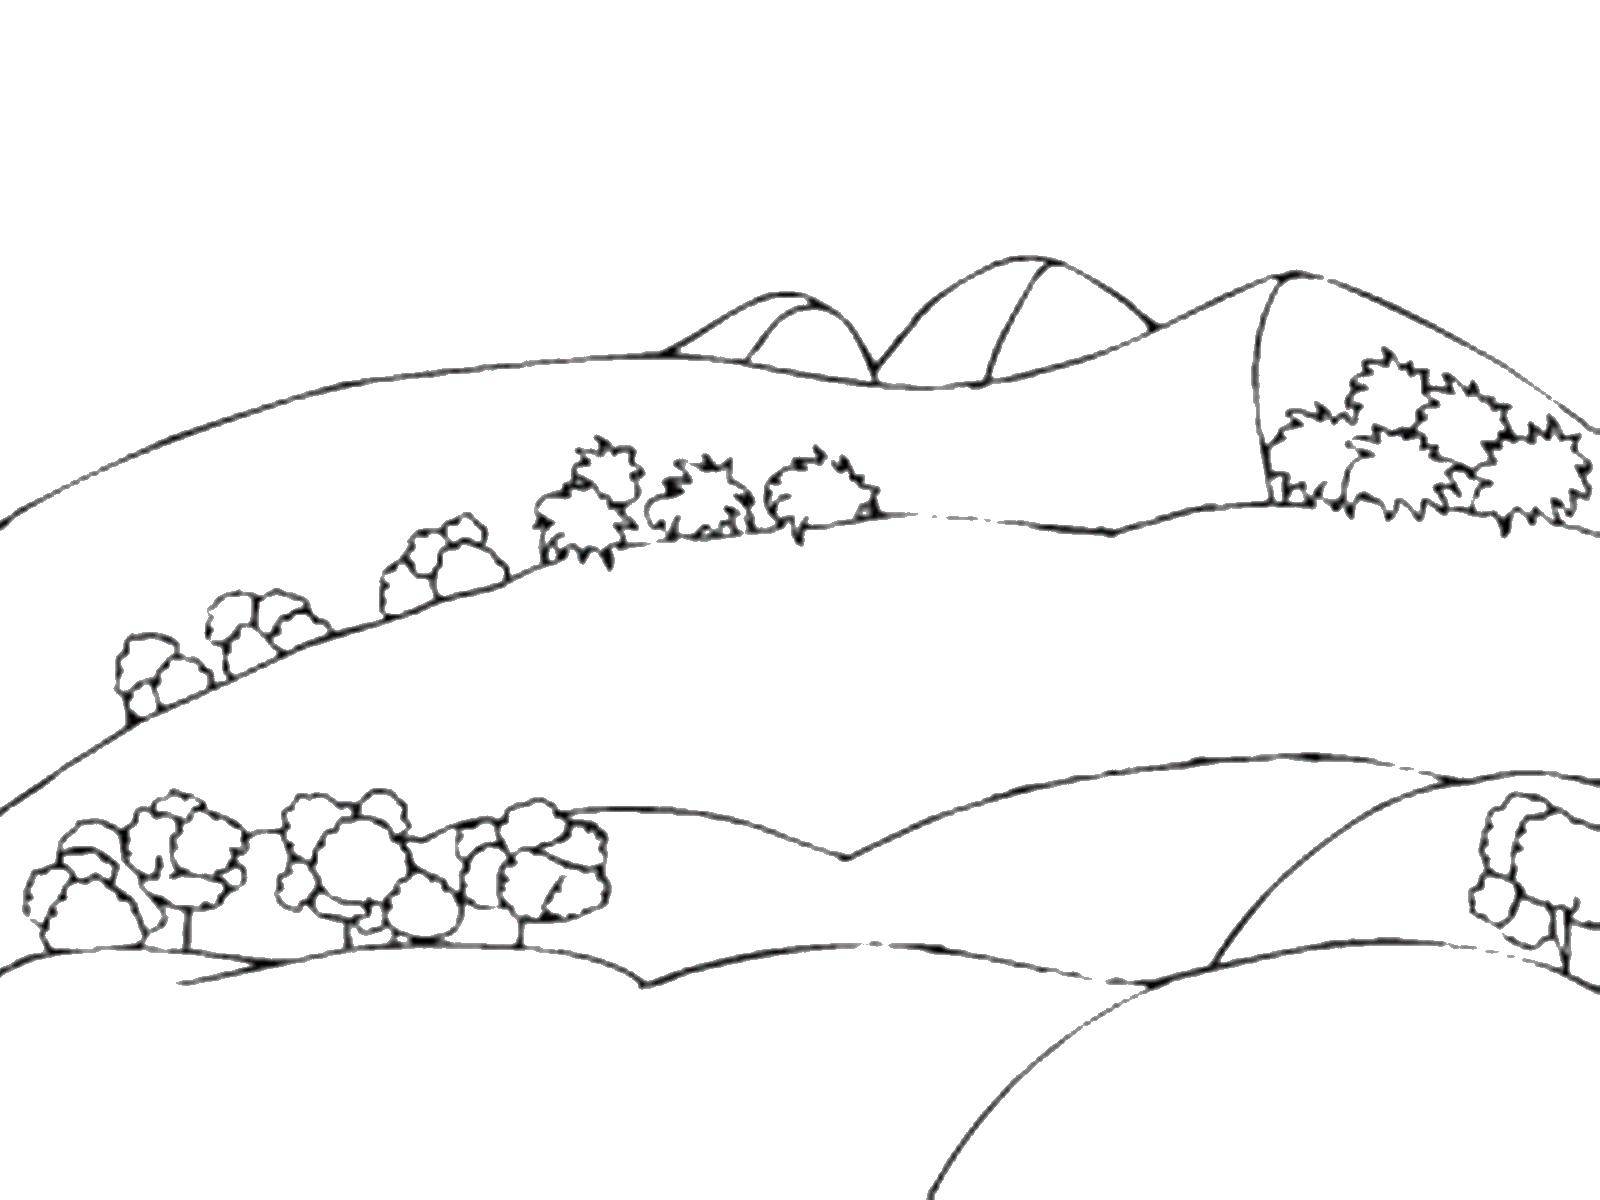 Coloring Mountains. Category Nature. Tags:  mountains.